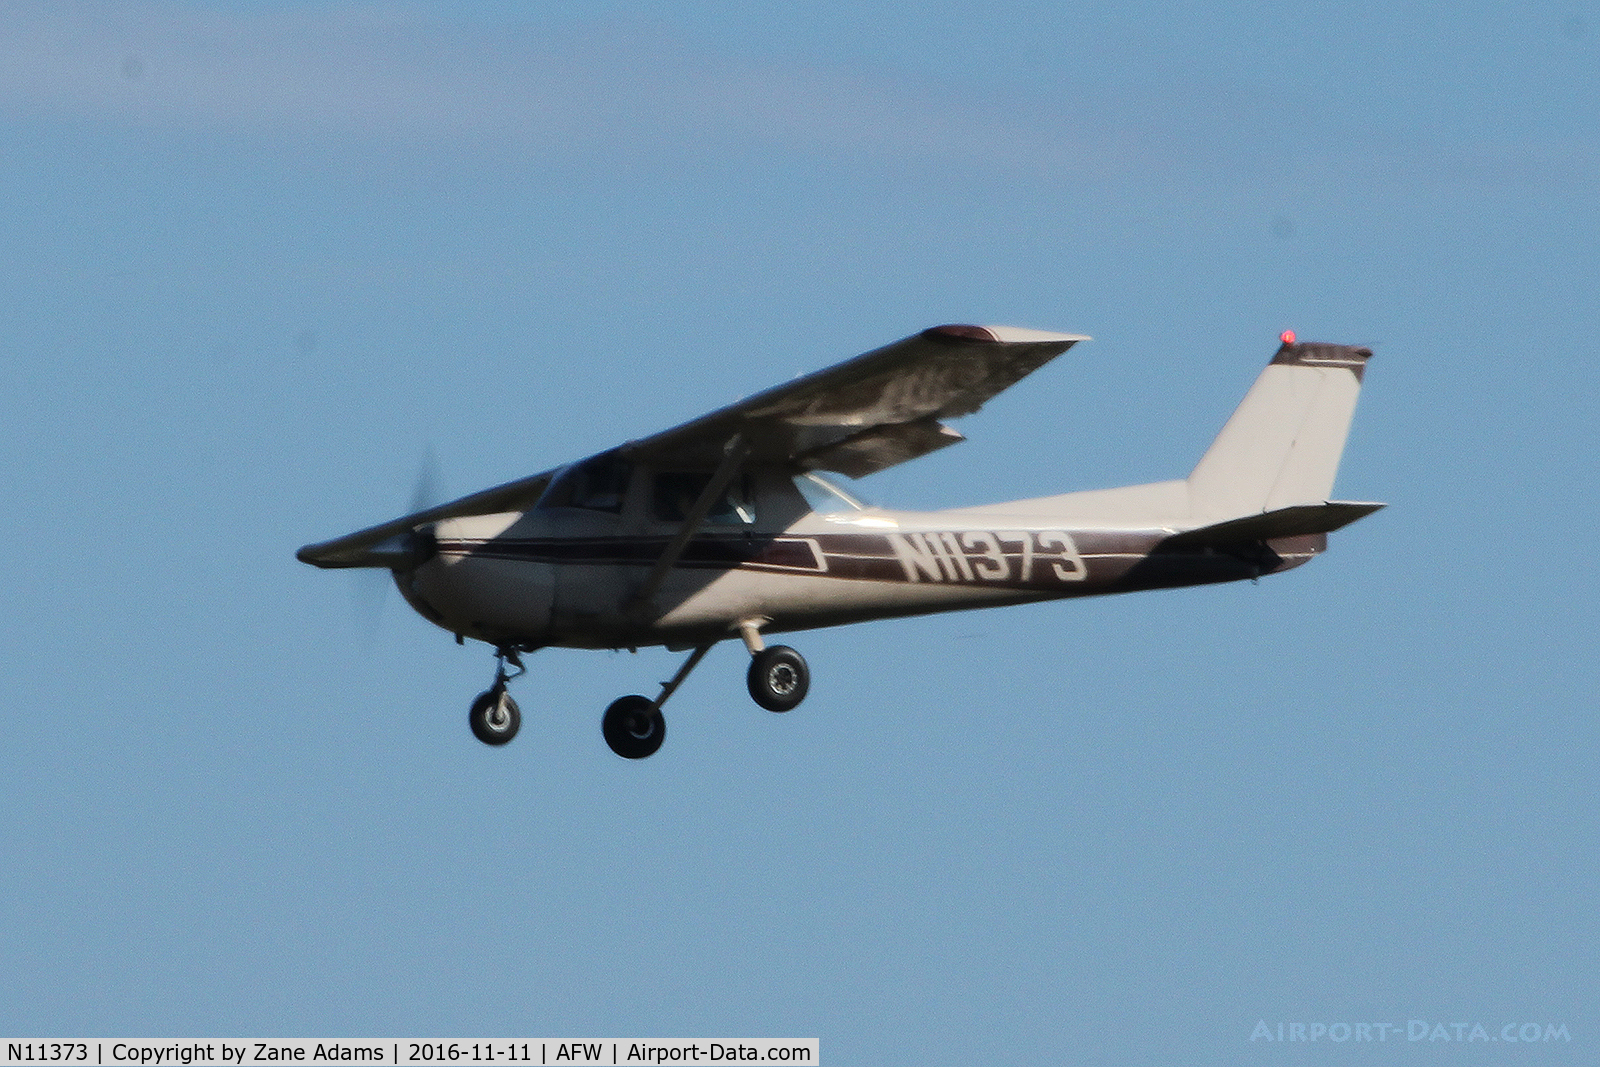 N11373, 1973 Cessna 150L C/N 15075363, At Alliance Airport - Fort Worth,TX